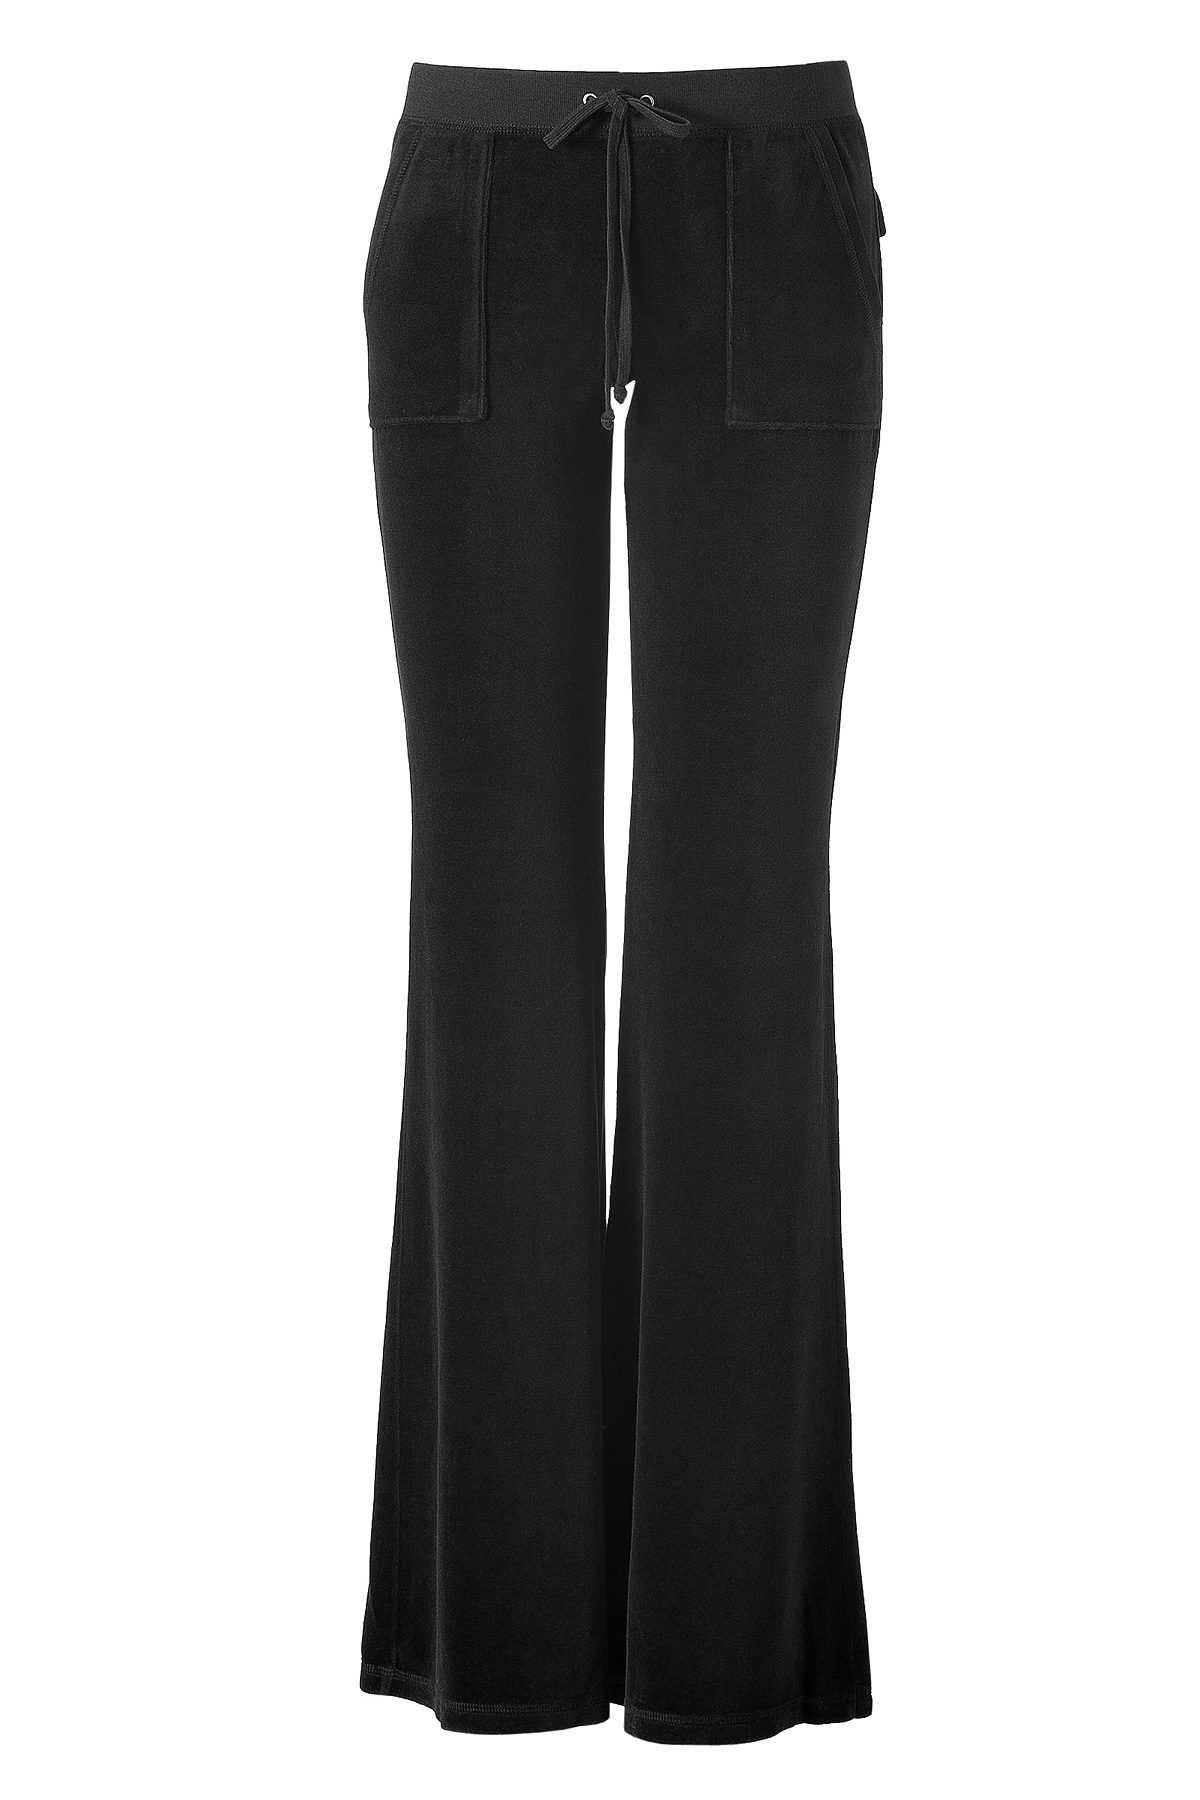 Juicy Couture Black Velvet Flared Leg Pants With Snap Pockets Back in ...